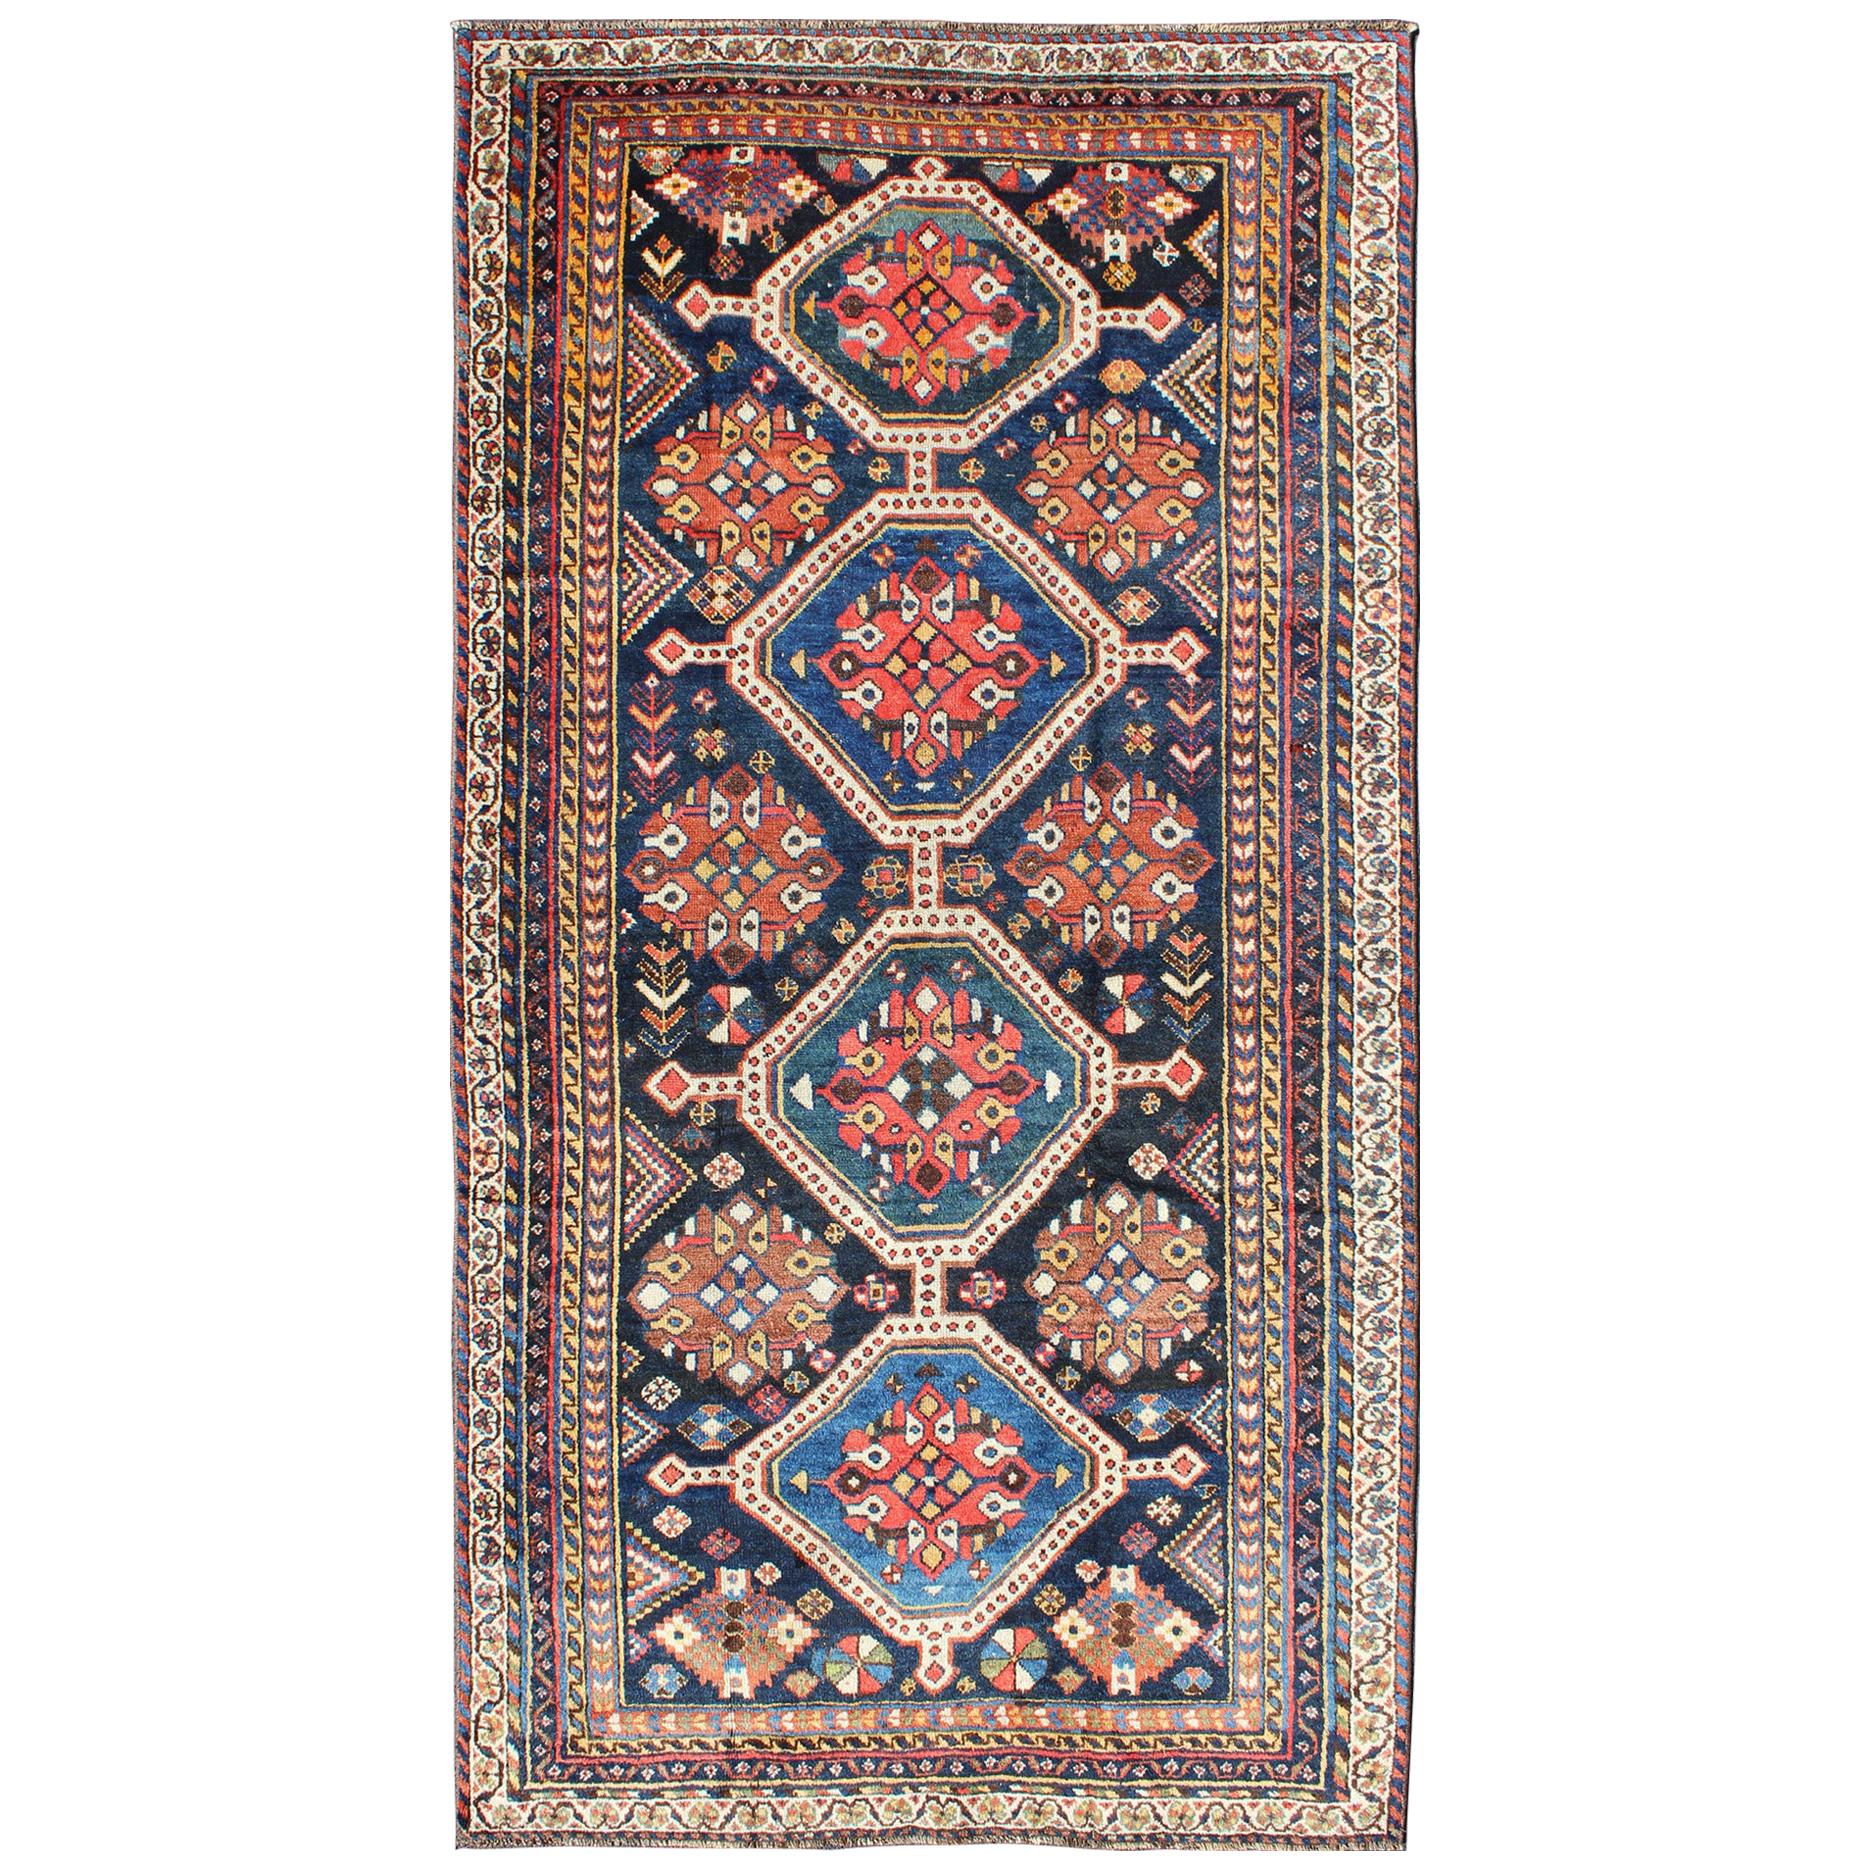 Antique Persian Qashqai Rug with Four-Medallion Design in Blue, Red, Brown Tones For Sale